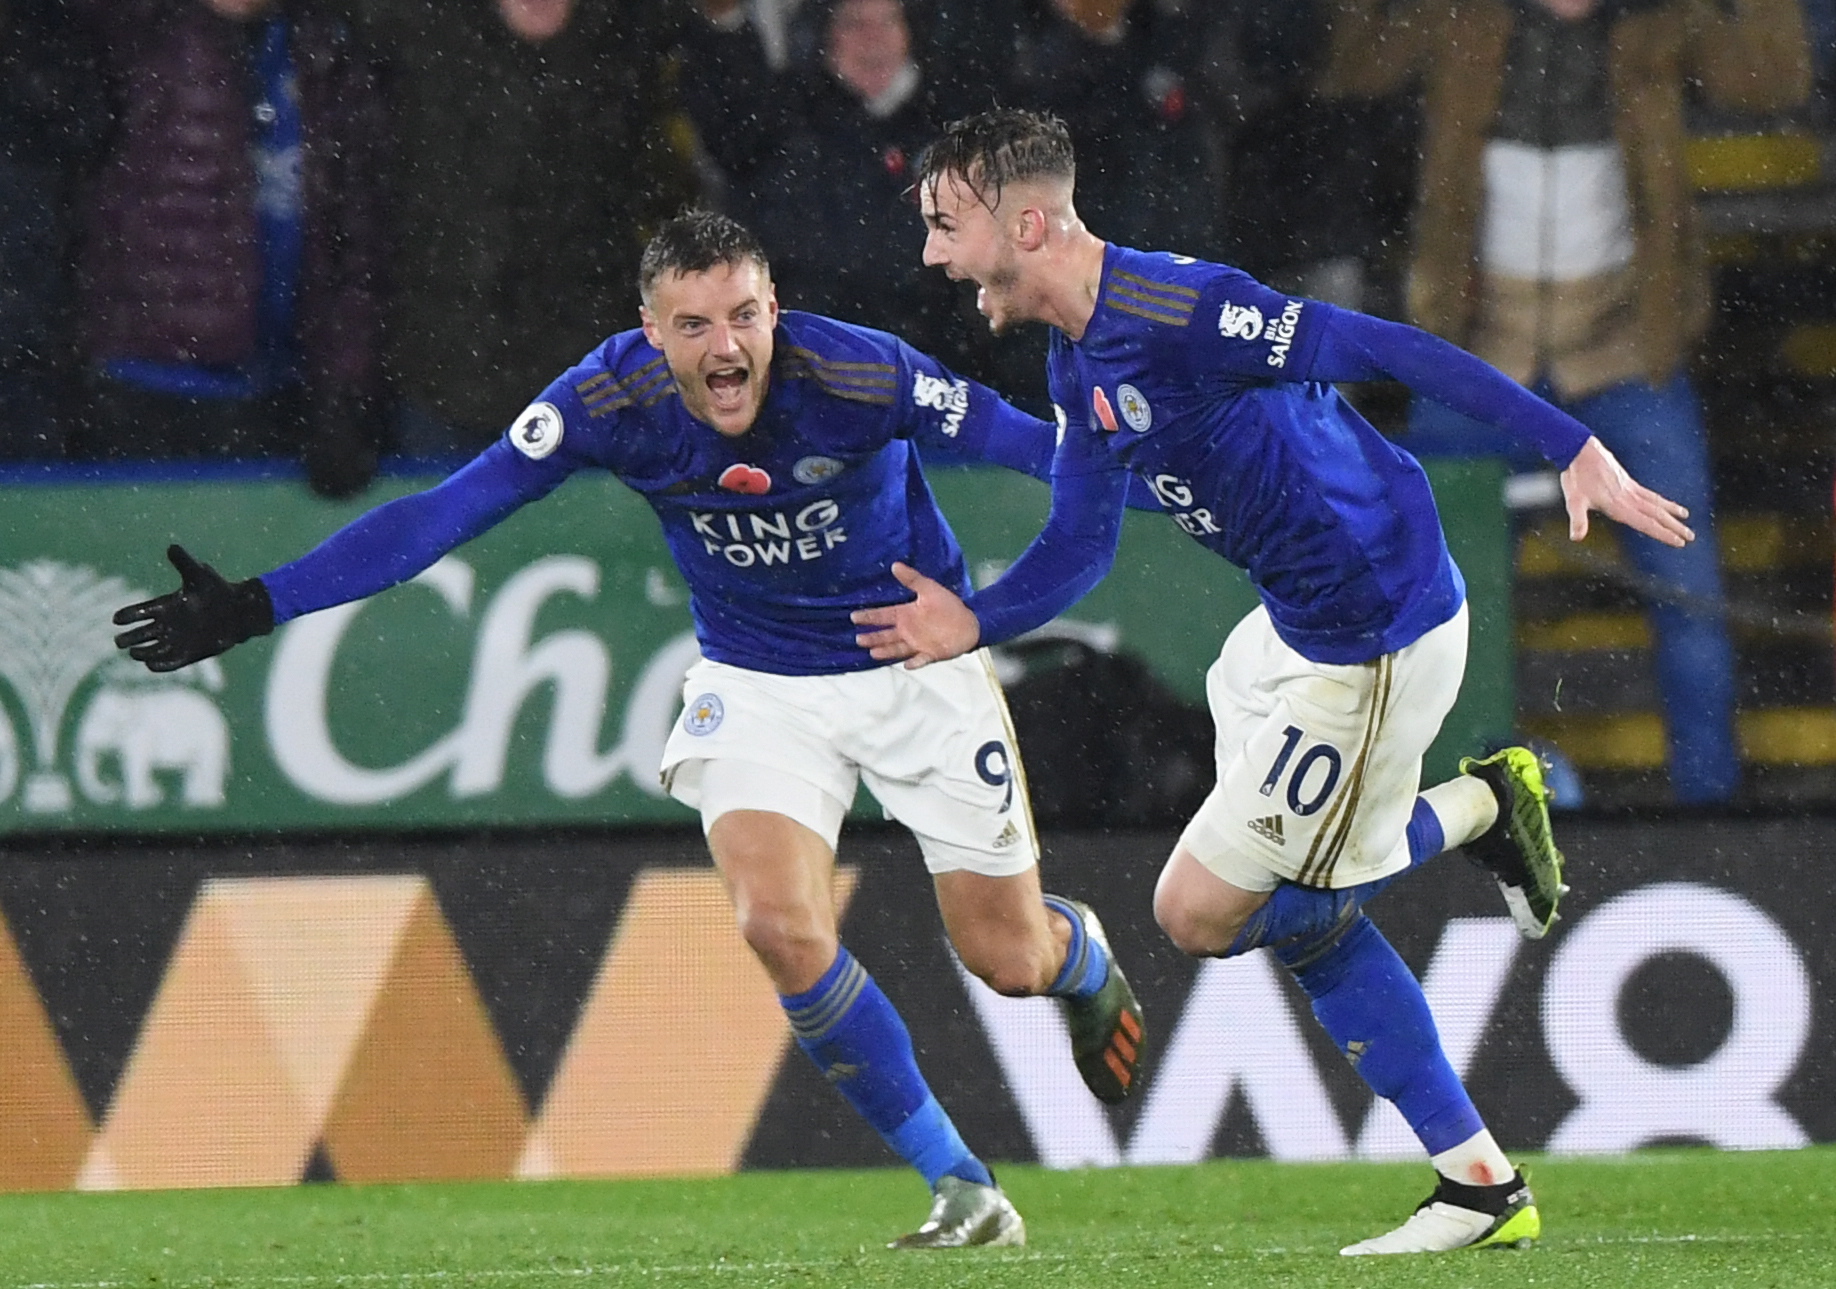 epa07984591 Leicester City's James Maddison (R) celebrates scoring a goal during the English Premier League soccer match between Leicester City v Arsenal at the King Power stadium in Leicester, Britain, 09 November 2019.  EPA/FACUNDO ARRIZABALAGA EDITORIAL USE ONLY. No use with unauthorized audio, video, data, fixture lists, club/league logos or 'live' services. Online in-match use limited to 120 images, no video emulation. No use in betting, games or single club/league/player publications